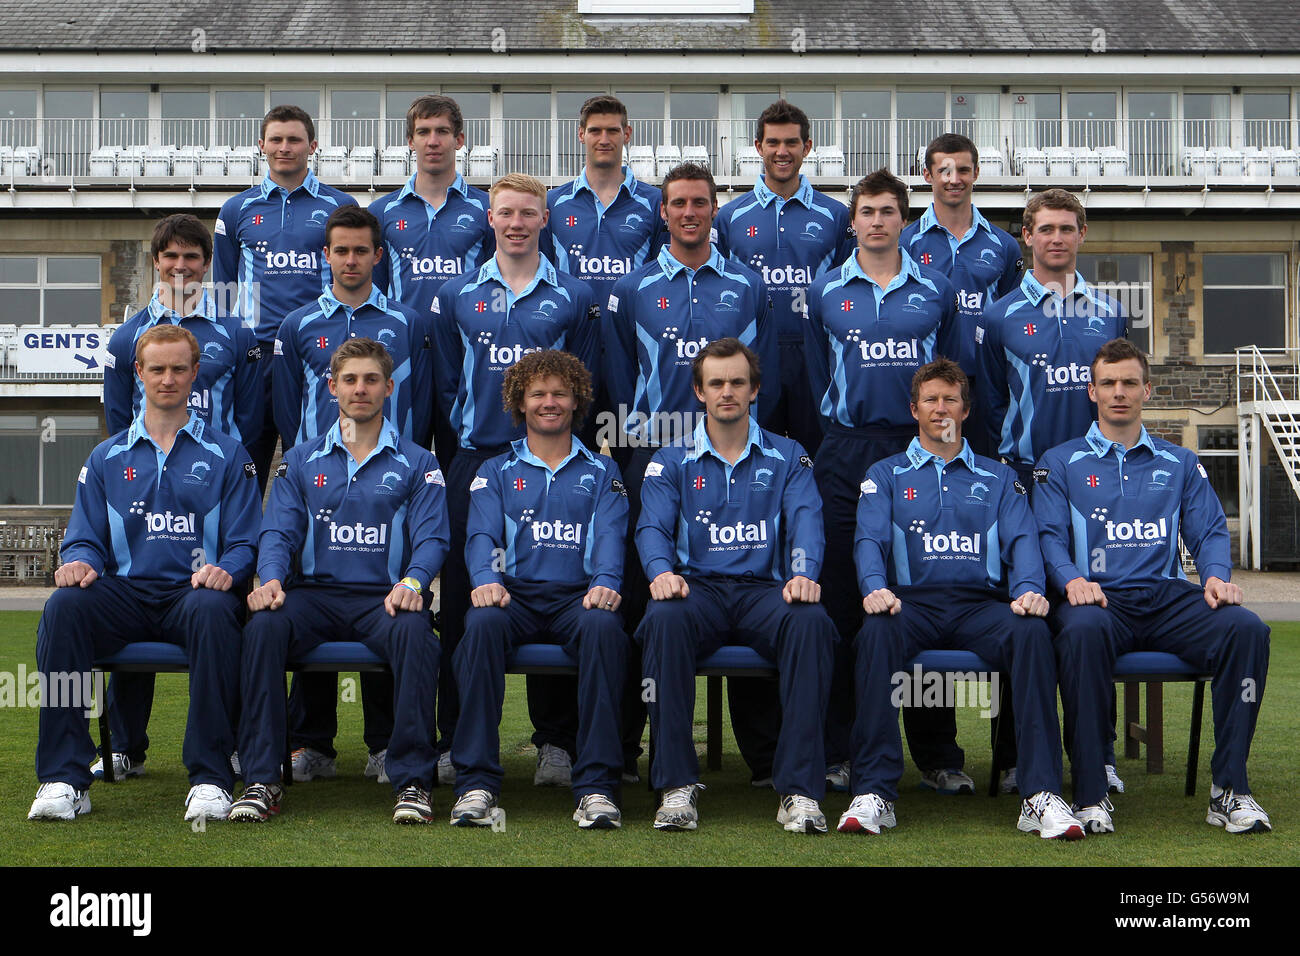 The Gloucestershire County cricket club team photo in One Day kit (bottom row left to right) Ian Saxelby, Chris Dent, Hamish Marshall, Captain Alex Gidman, Jonathan Batty, Will Gidman (middle row left to right) Richard Coughtrie, Jack Taylor, Liam Norwell, David Wade, James Fuller, Ian Cockbain, (top row left to right) Paul Muchall, Graeme McCarter, David Payne, Ed Young, Dan Housego Stock Photo